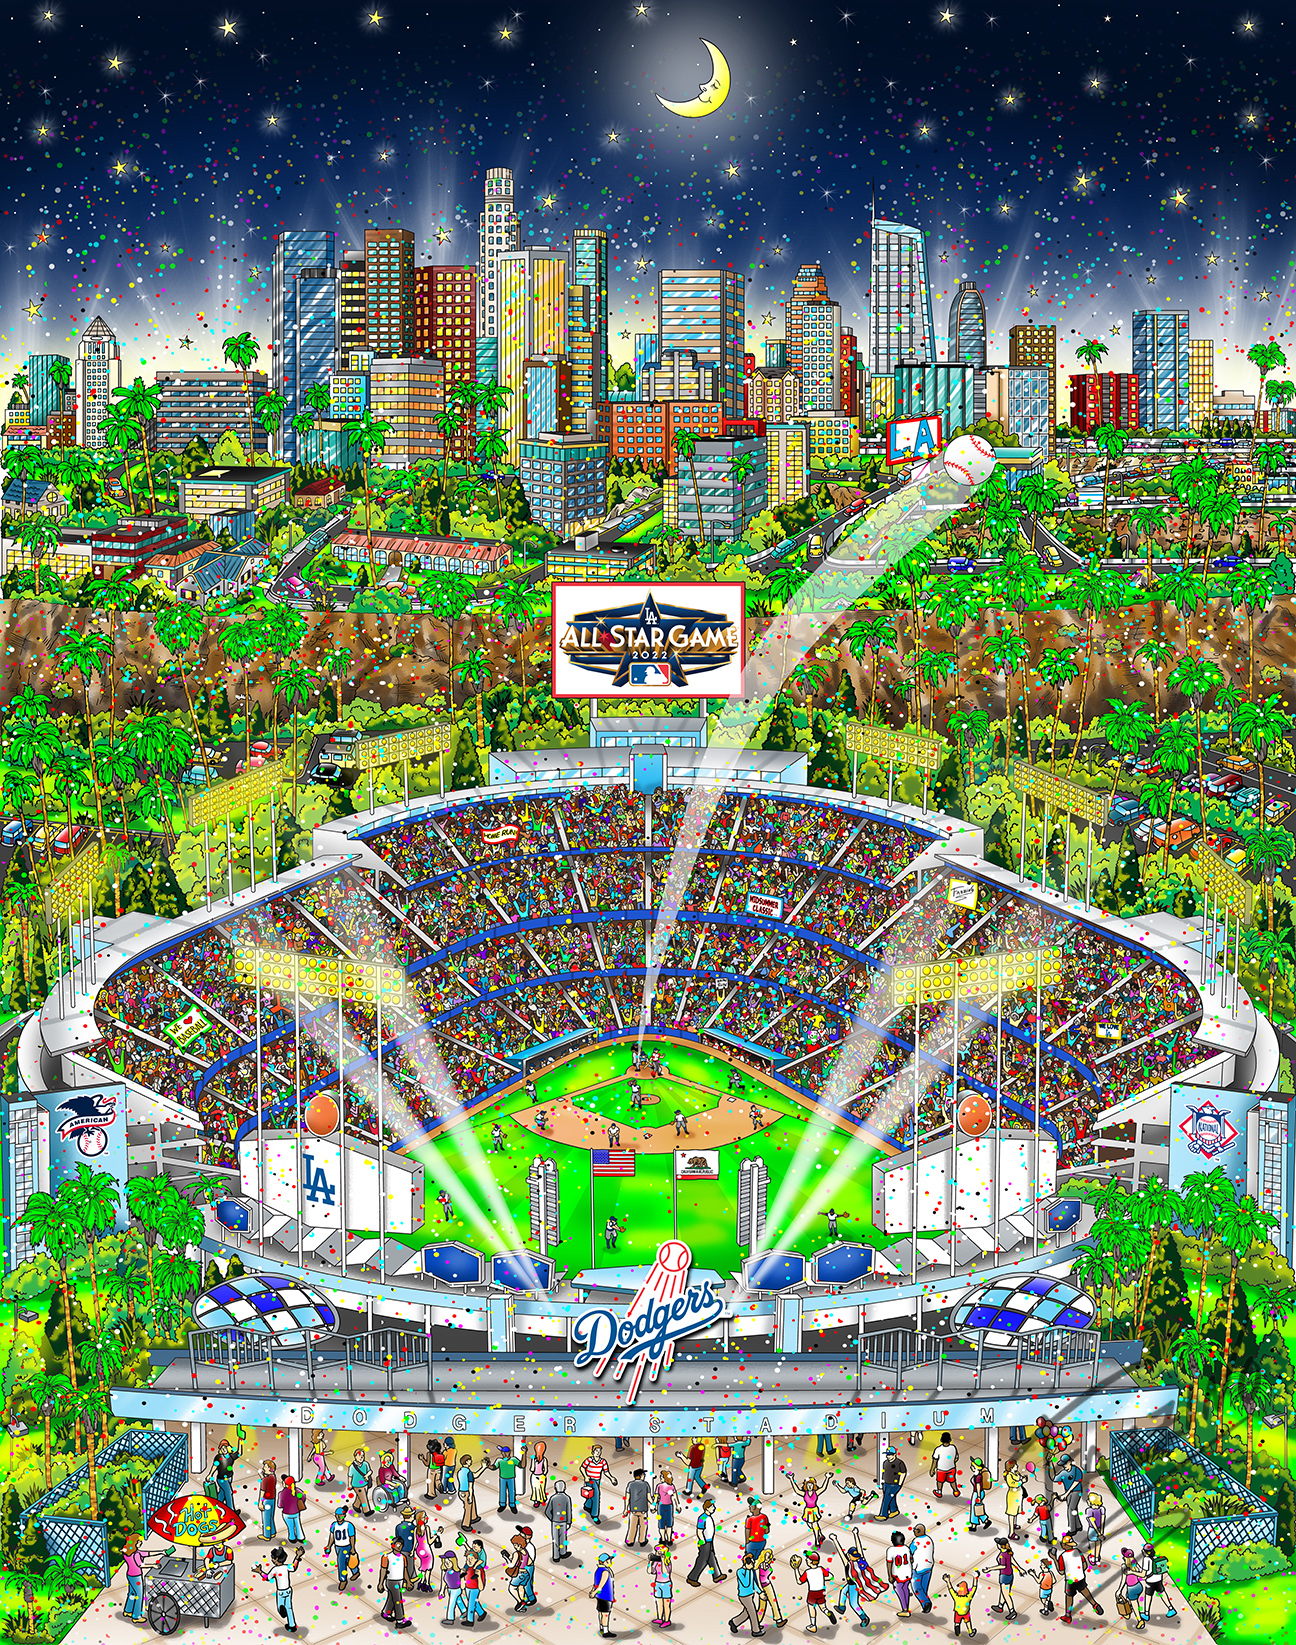 Night skyline of Los Angeles and Playball park of MLB All Star Game poster done by Charles Fazzino